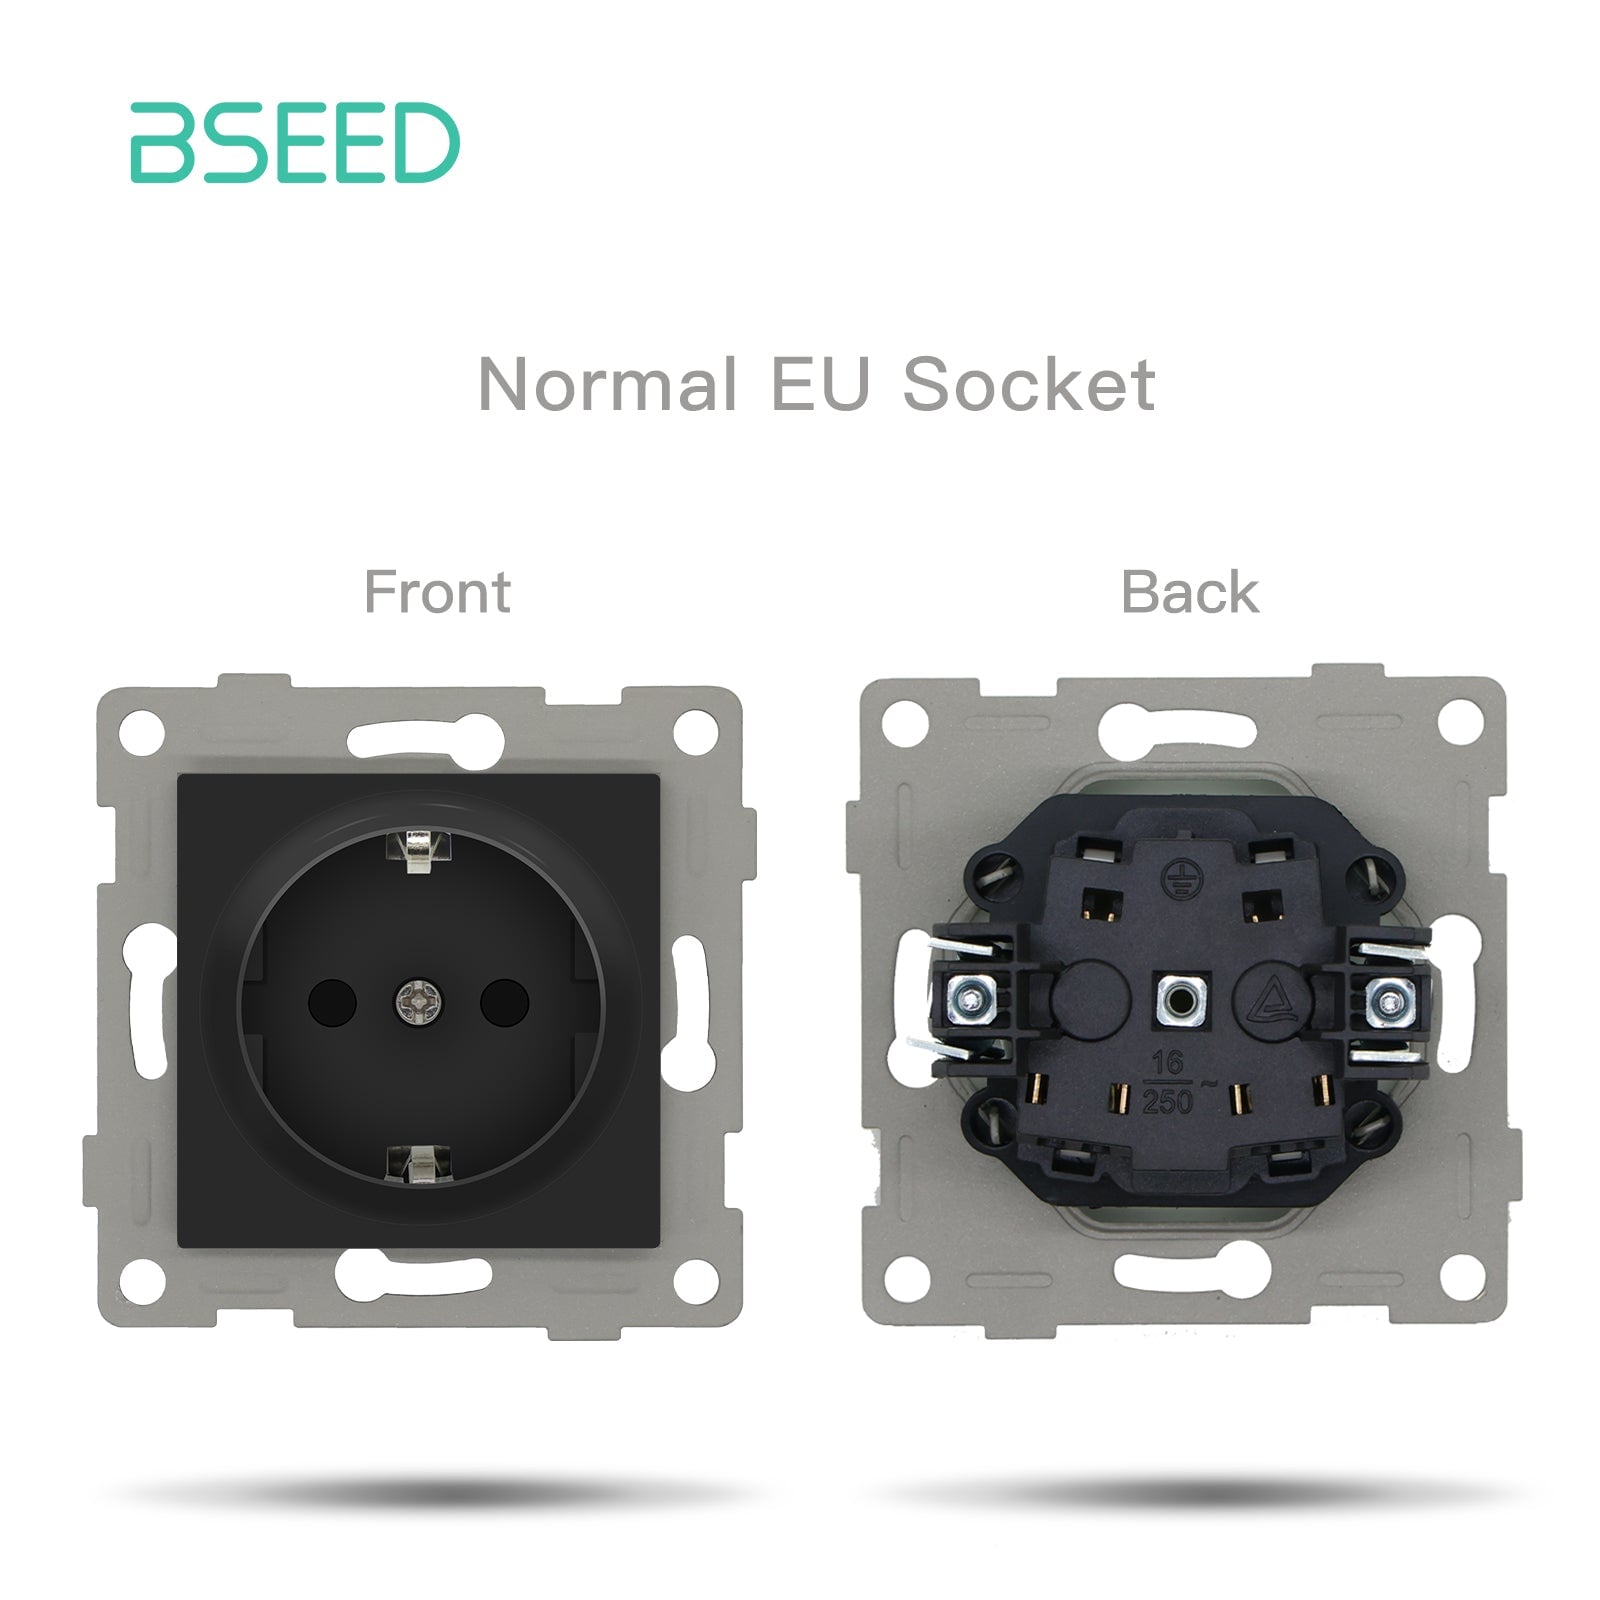 BSEED EU standard Function Key Cover Socket with Claw technology DIY Parts Power Outlets & Sockets Bseedswitch BLACK normal eu socket 